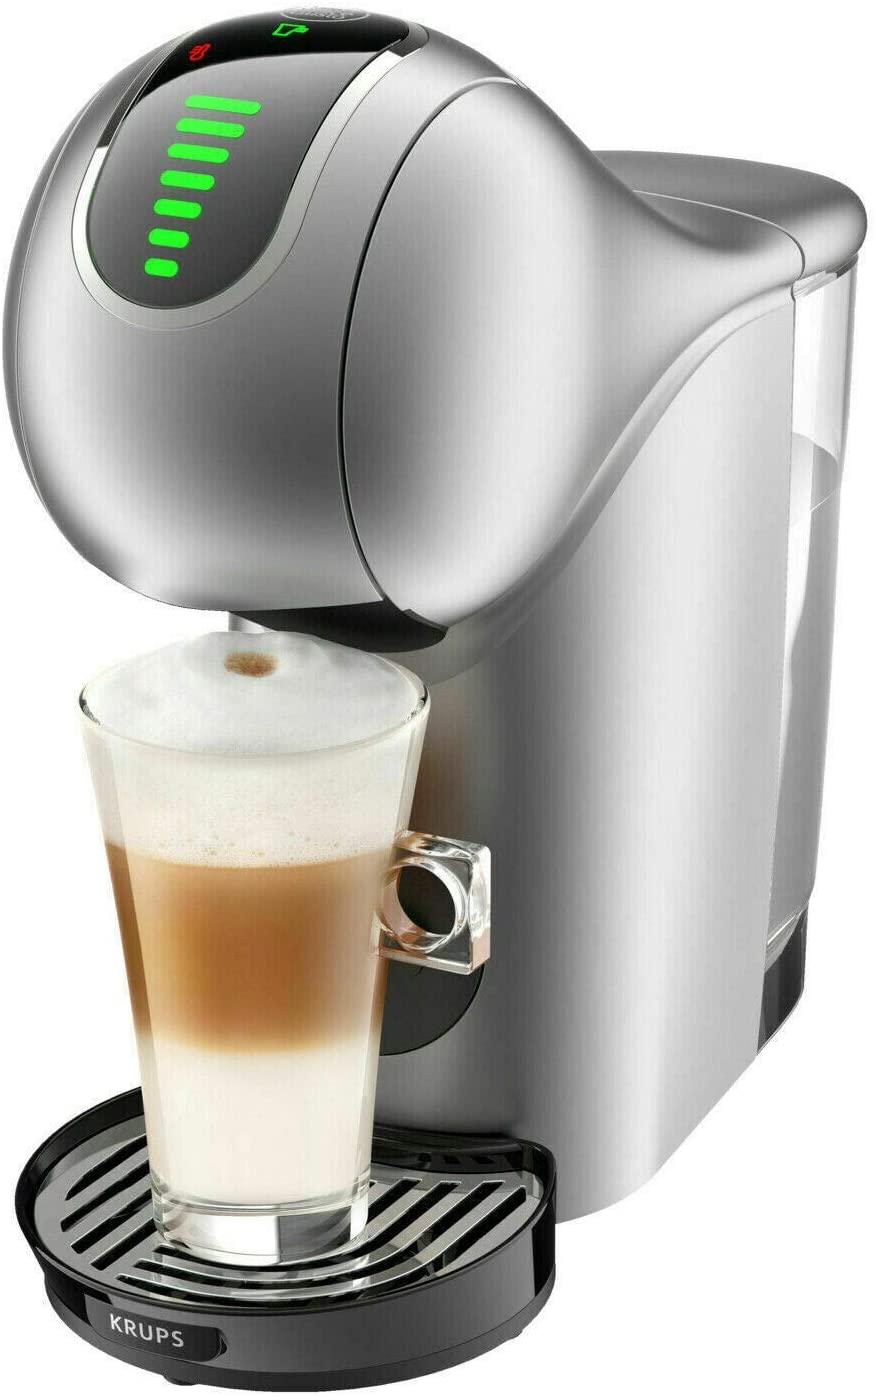 Krups Dolce gusto Genio s. Nescafe Dolce gusto Genio. Nescafe Krups капсулы. Krups Genio s Plus. Кофемашины dolce gusto genio